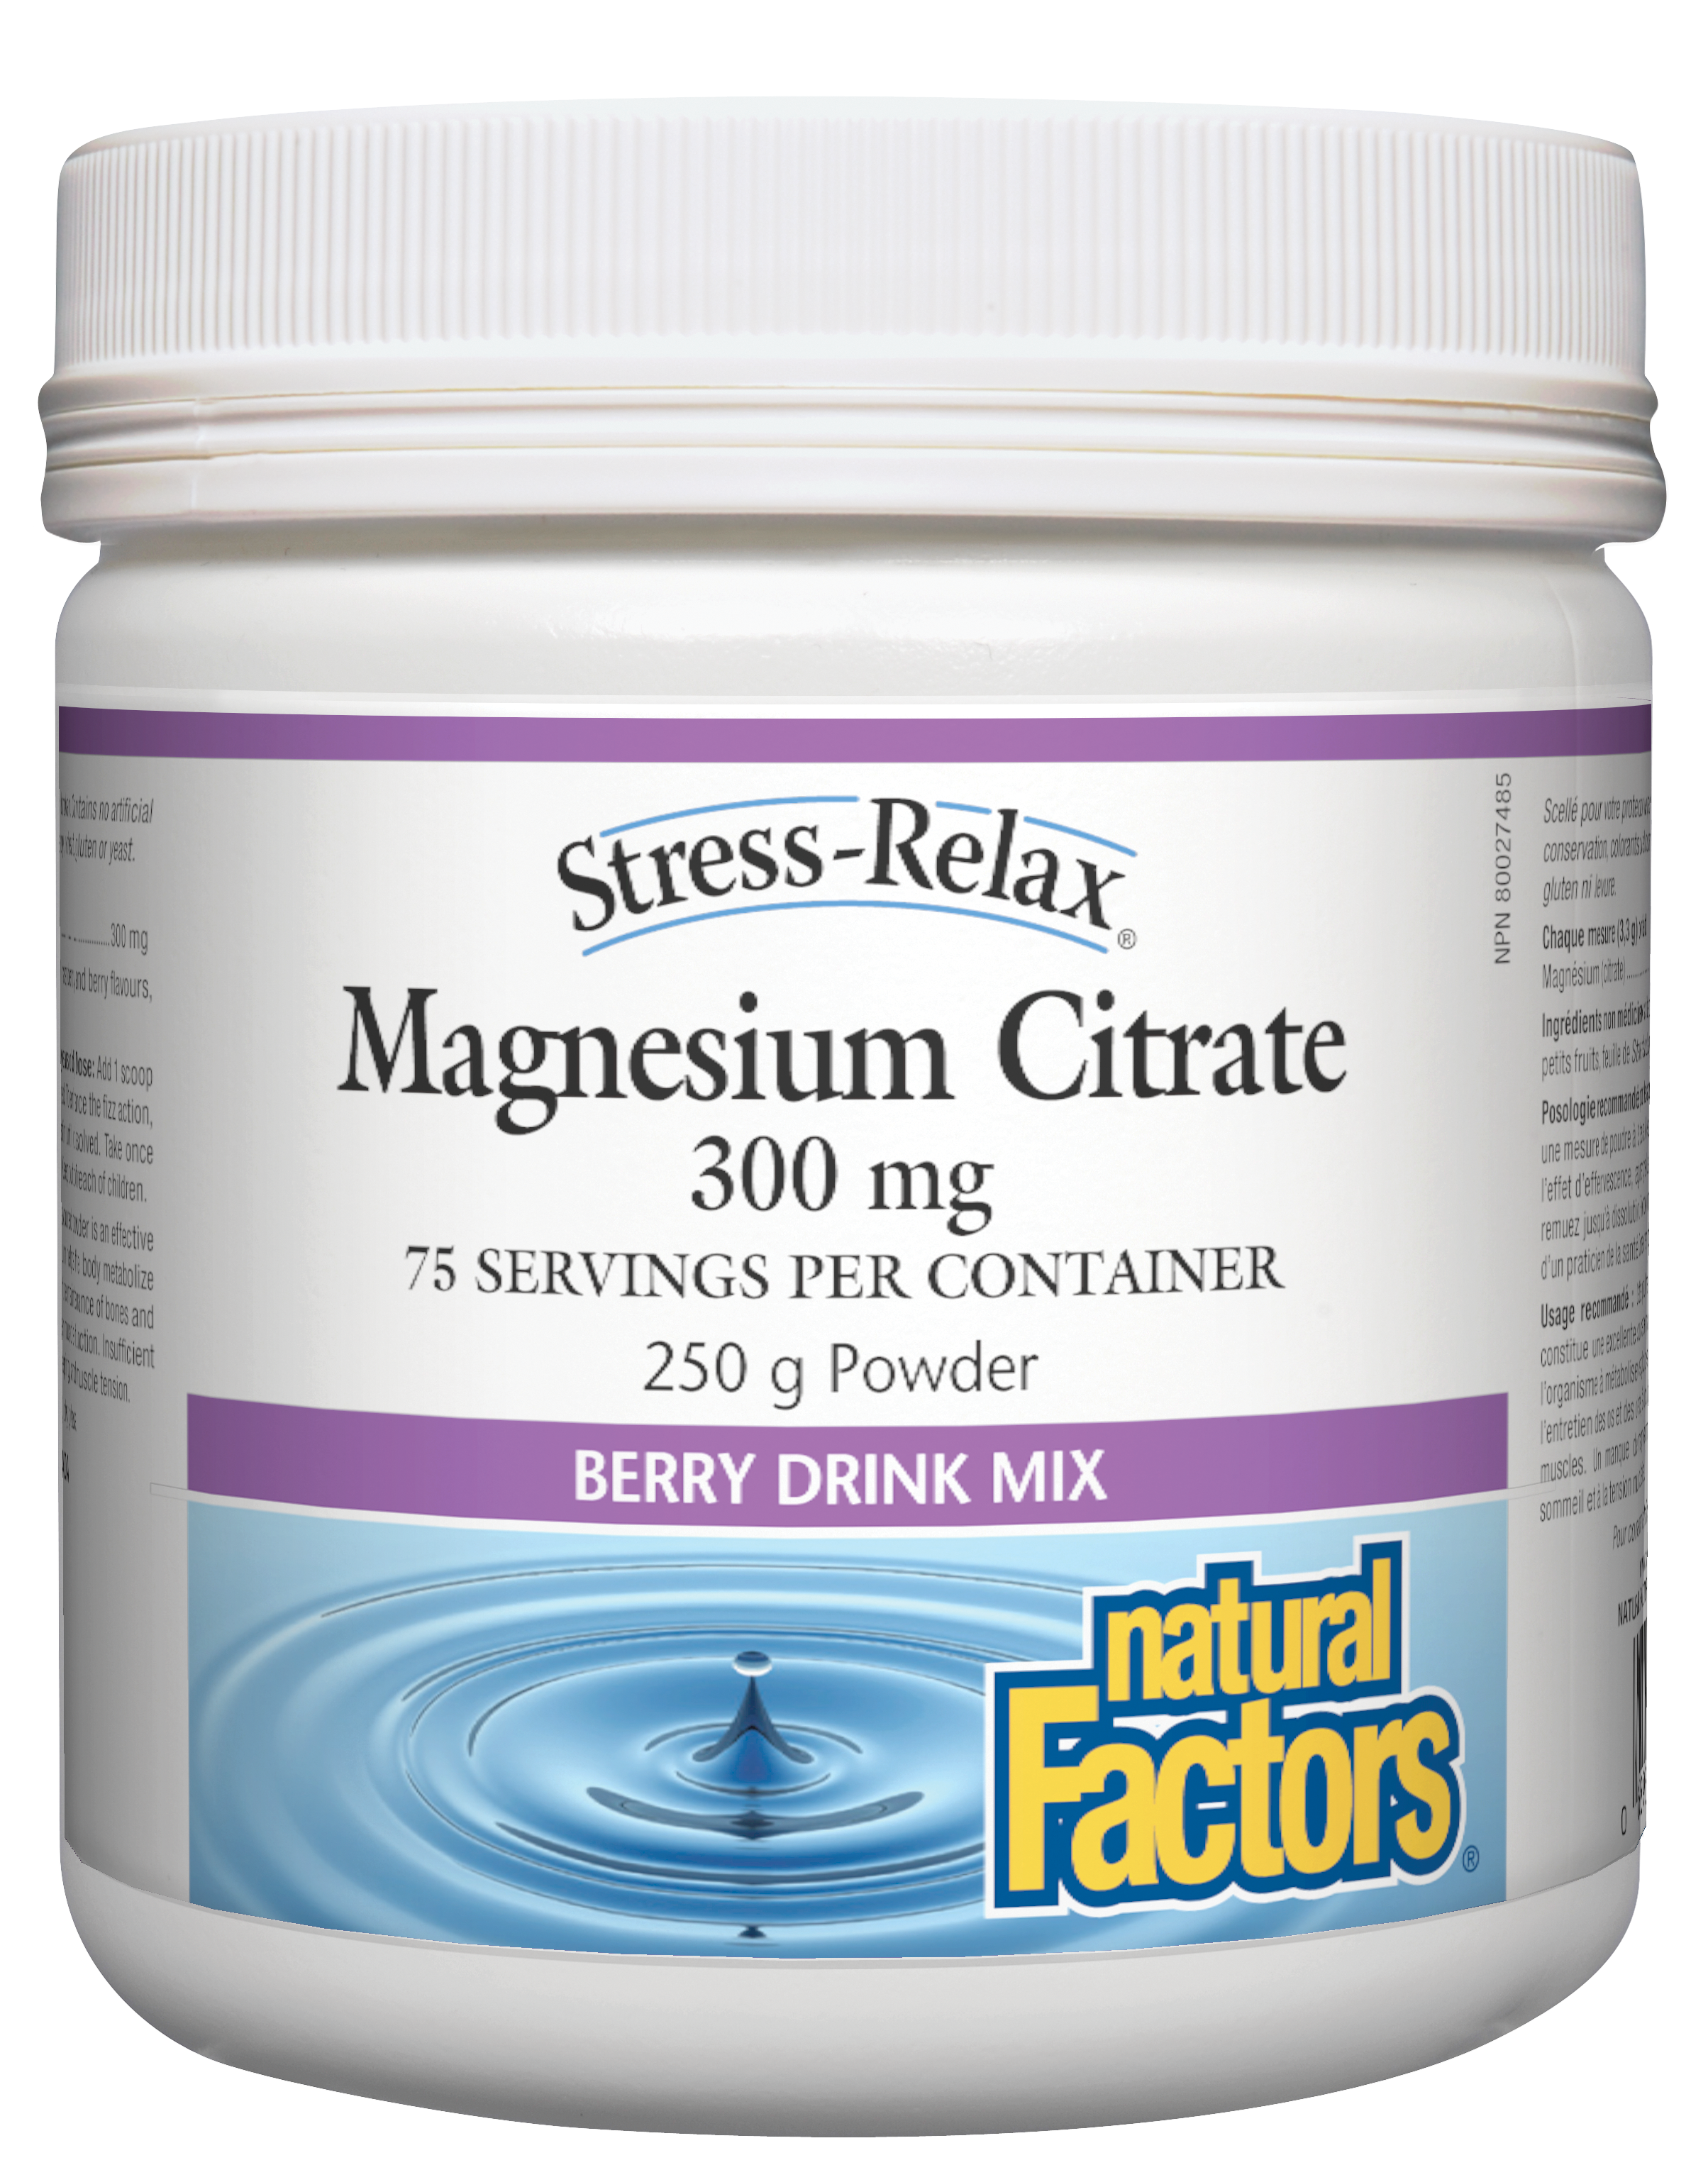 Magnesium Citrate 300mg 250g Powder Berry Drink - Lighten Up Shop